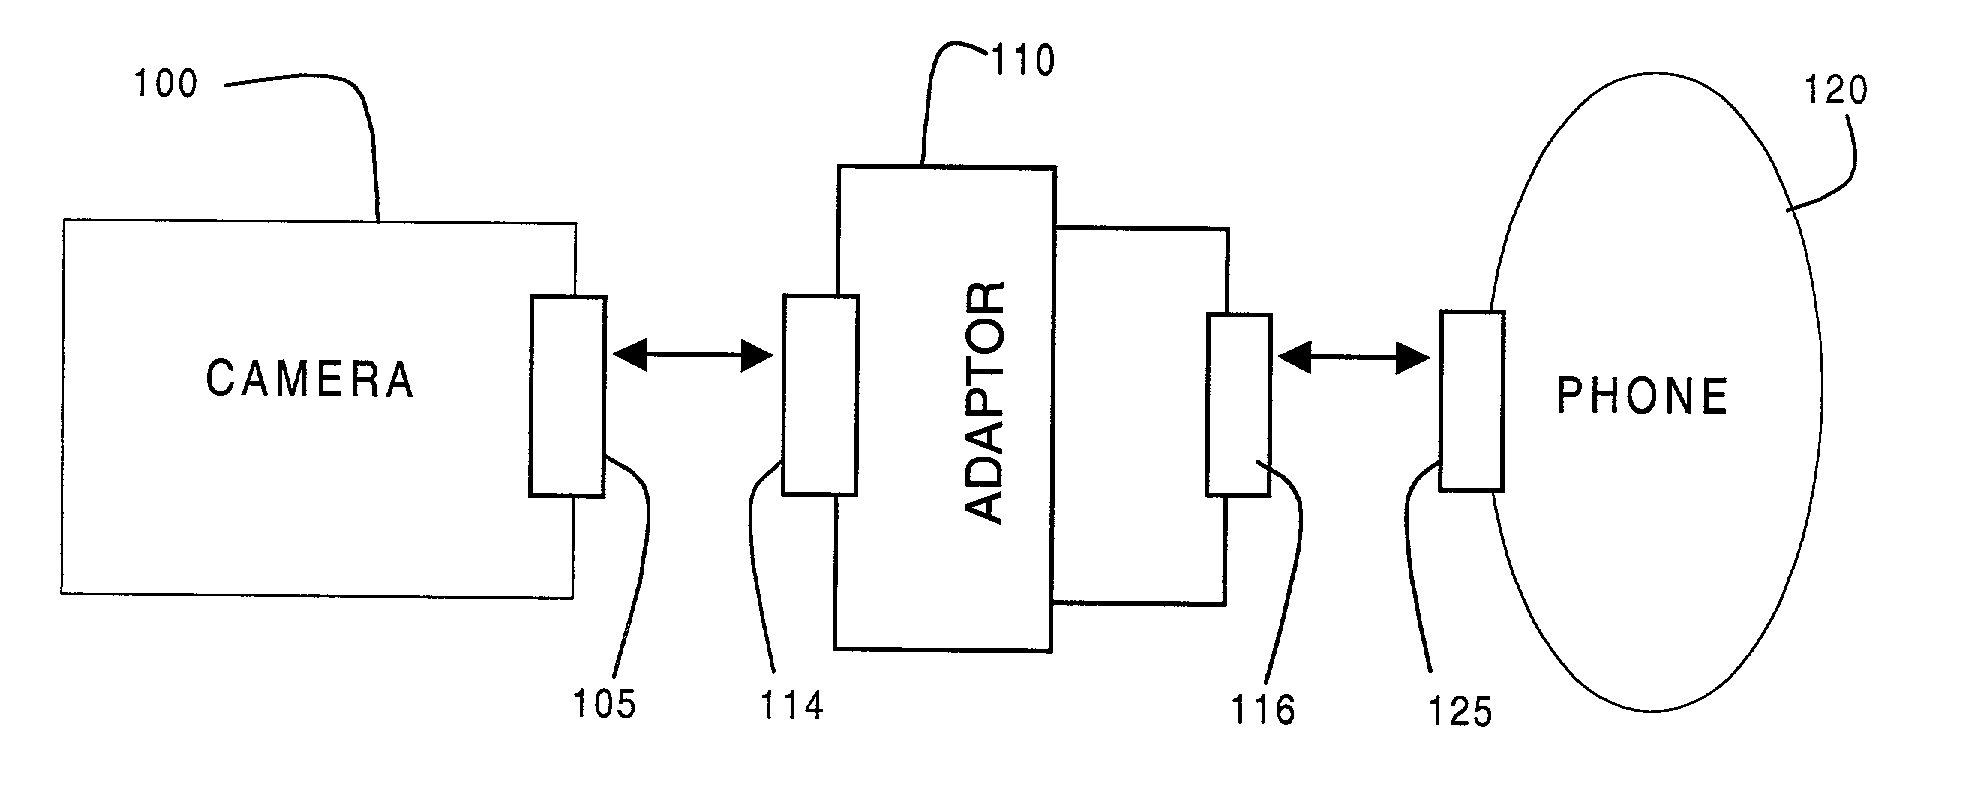 Versatile adaptor device and manufacturing process for connecting a client device to various host devices